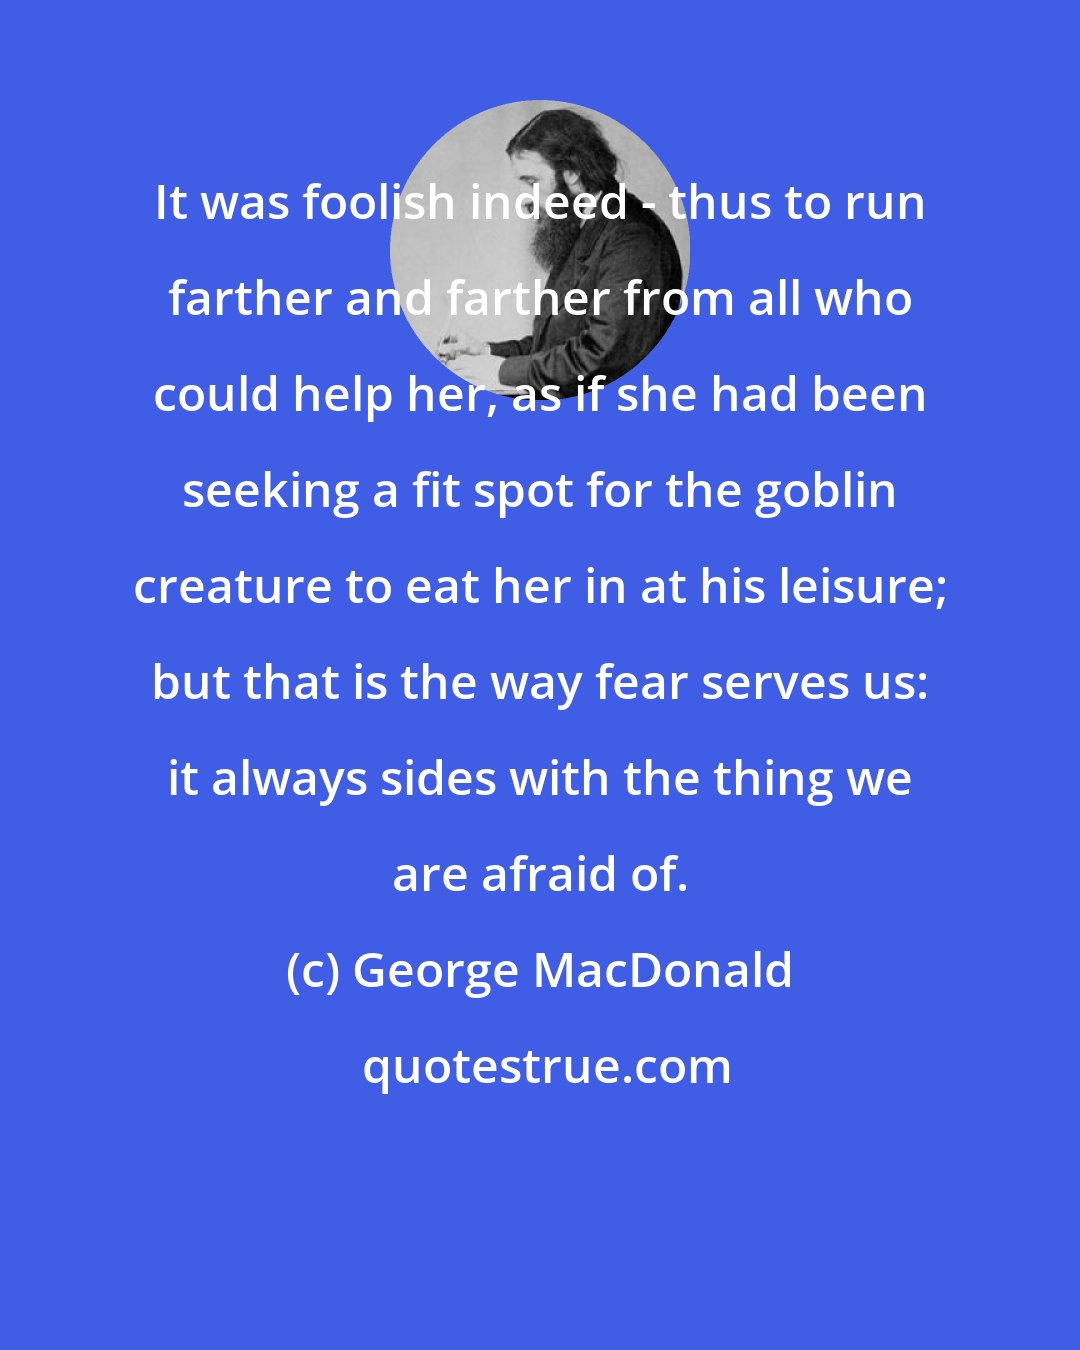 George MacDonald: It was foolish indeed - thus to run farther and farther from all who could help her, as if she had been seeking a fit spot for the goblin creature to eat her in at his leisure; but that is the way fear serves us: it always sides with the thing we are afraid of.